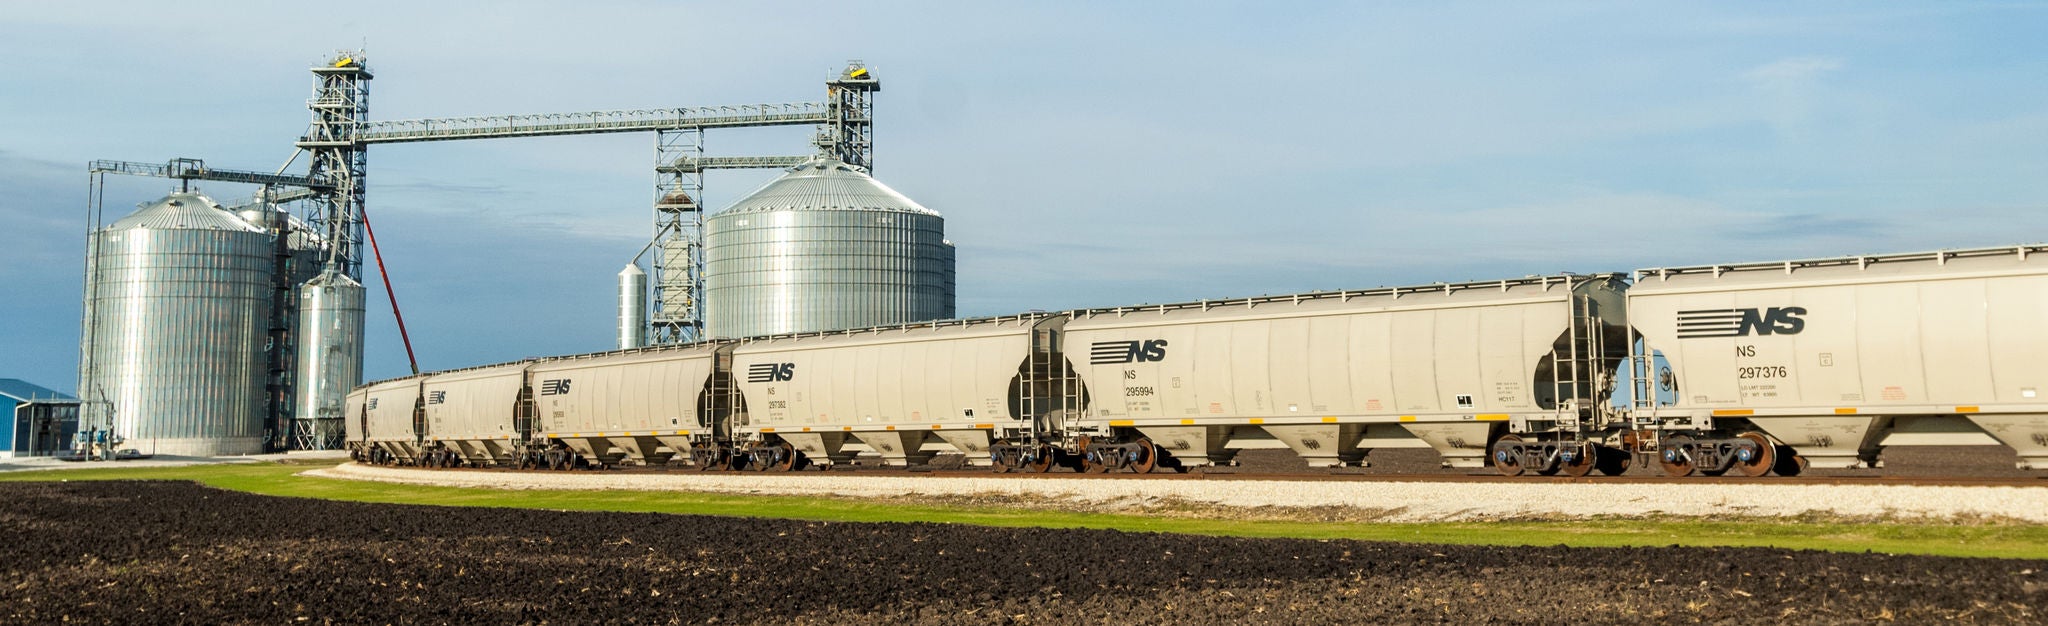 Norfolk Southern Train Shipping Agricultural Forest Product